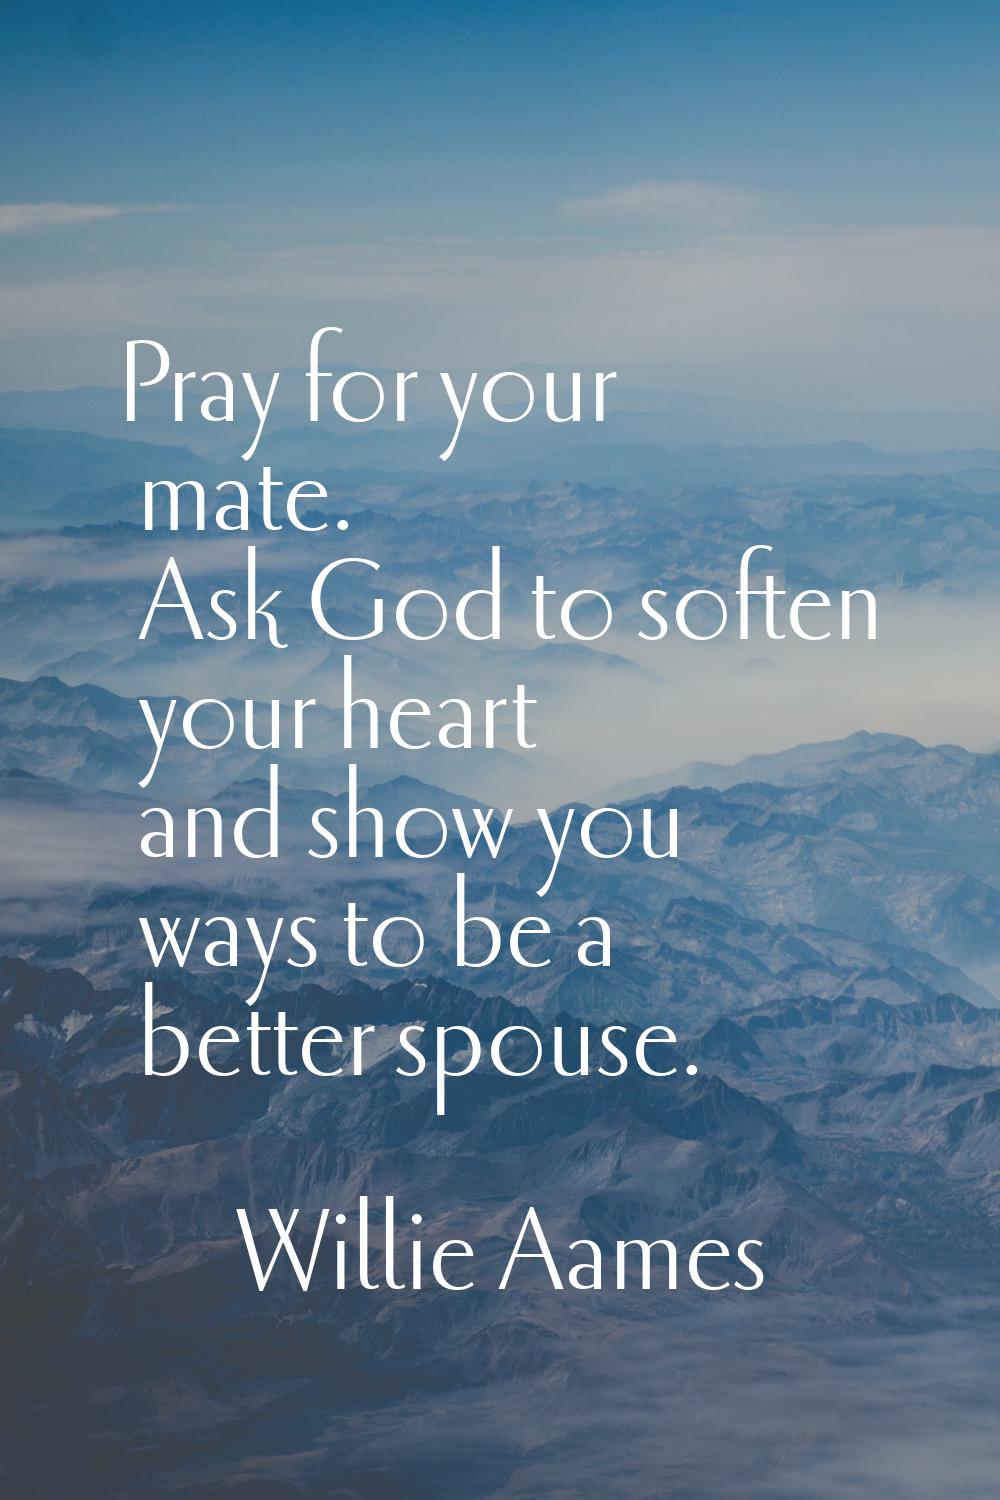 Pray for your mate. Ask God to soften your heart and show you ways to be a better spouse.